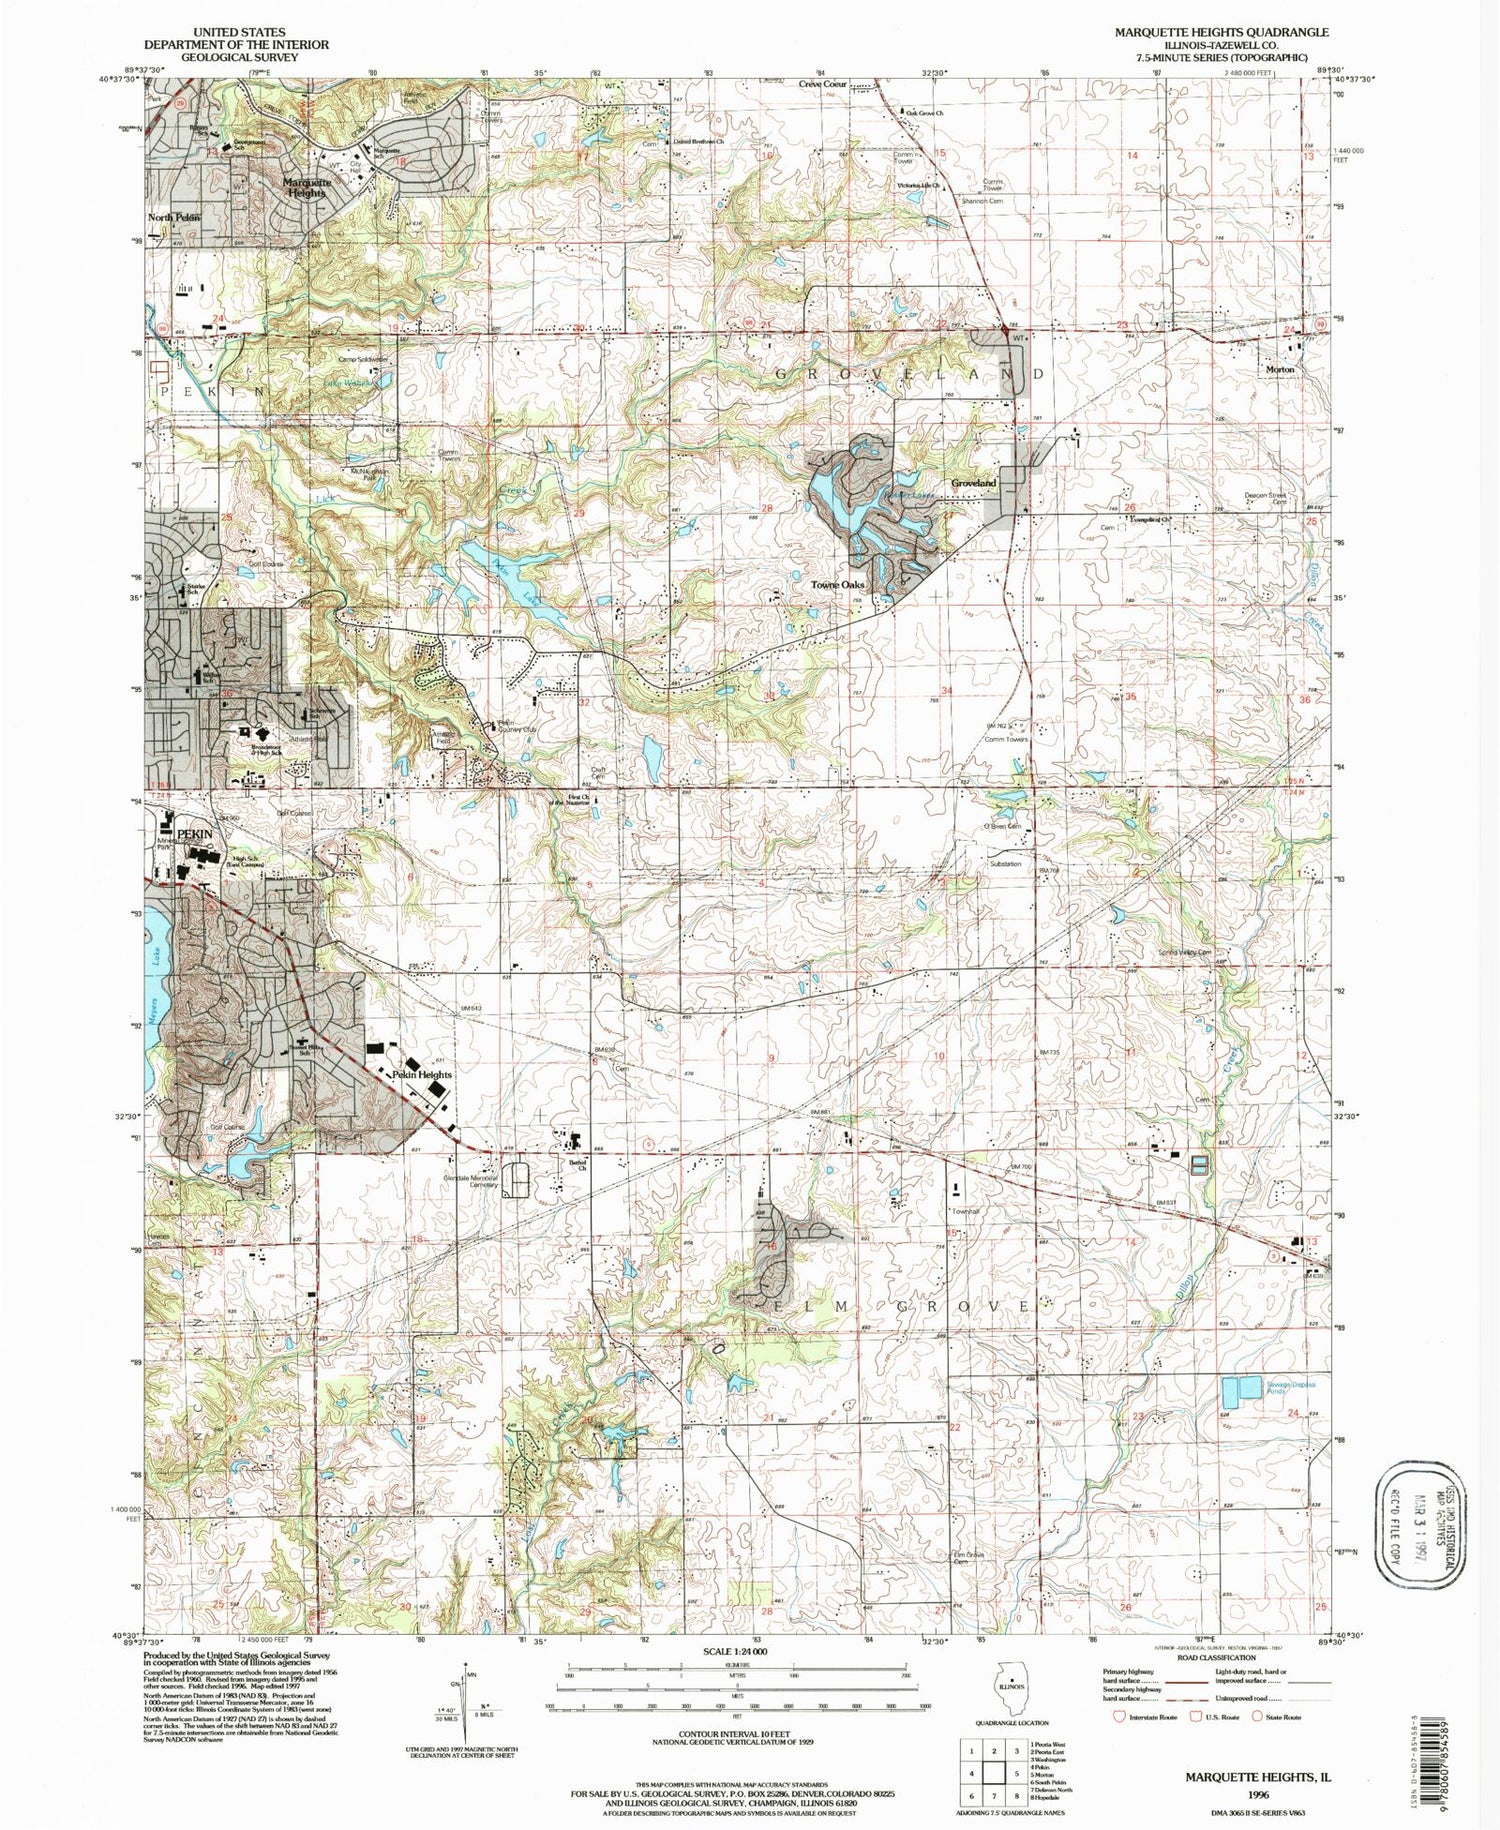 Classic USGS Marquette Heights Illinois 7.5'x7.5' Topo Map Image